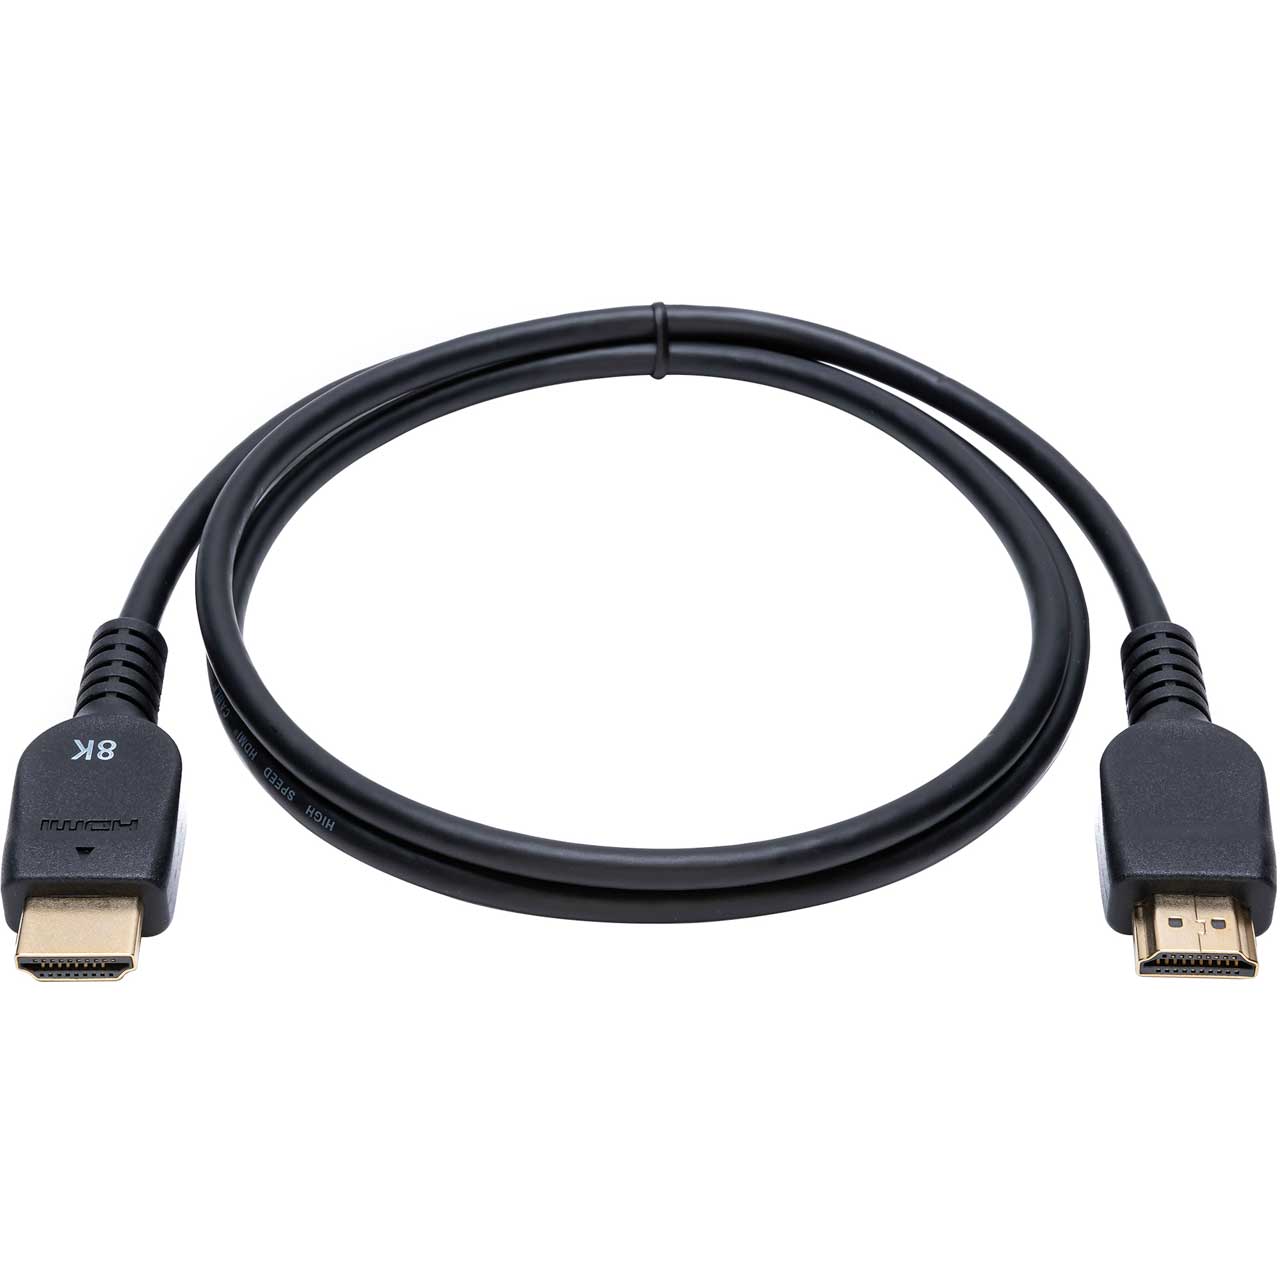 HDMI CABLE Ultra high speed, 2 metres